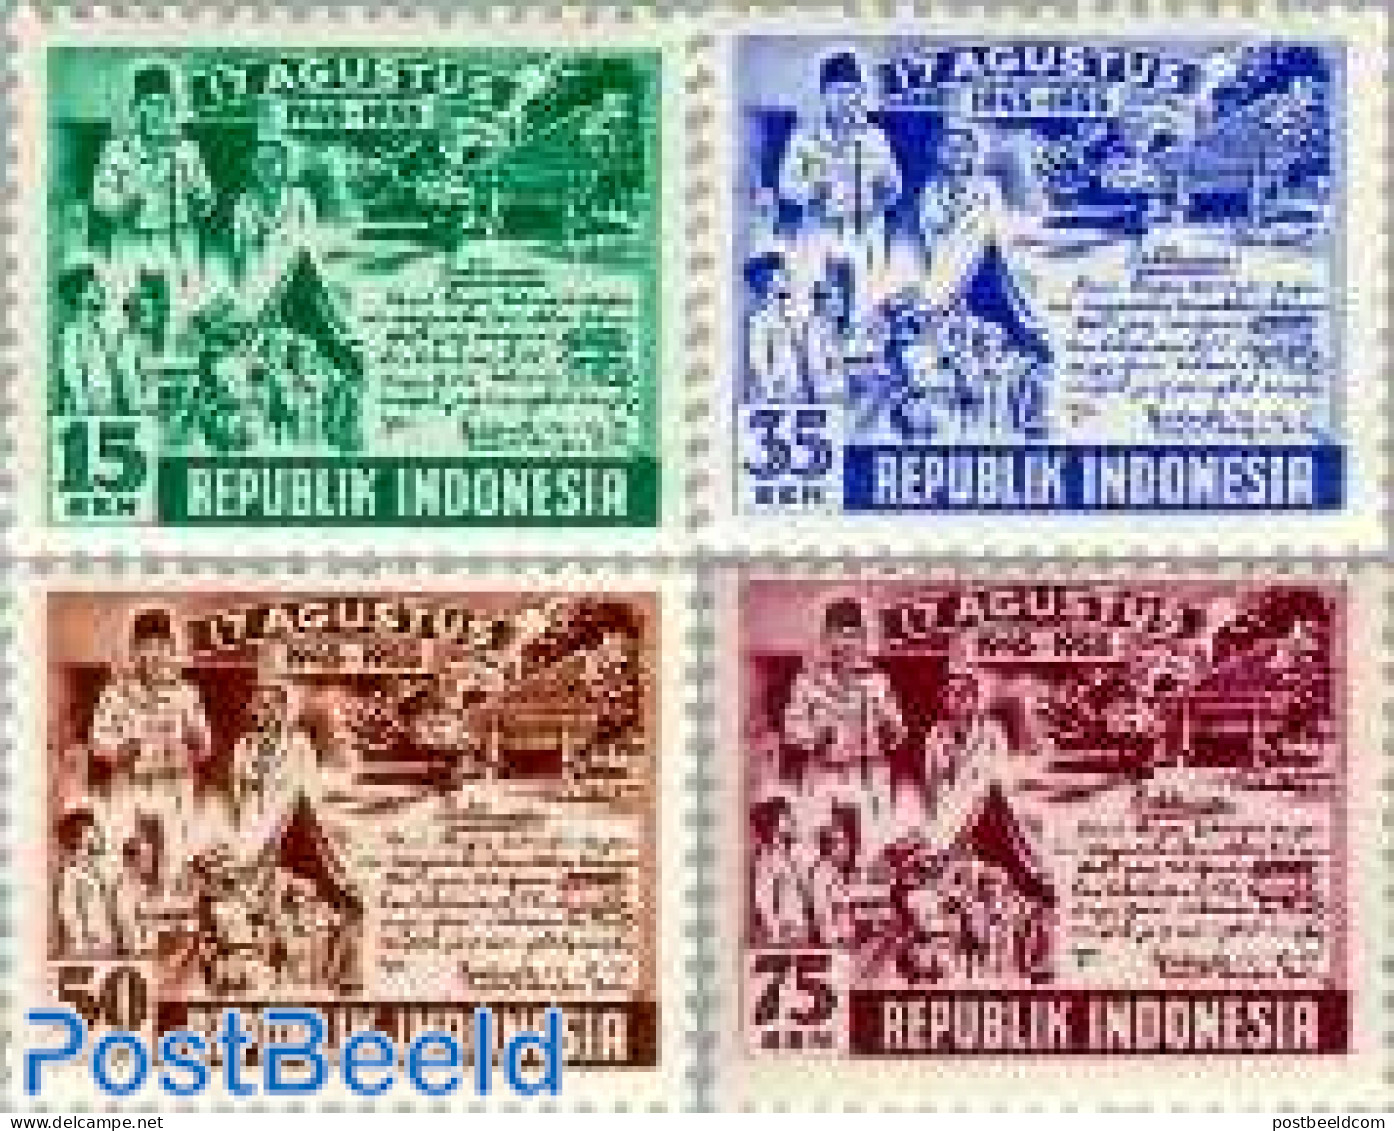 Indonesia 1955 10 Years Independence 4v, Mint NH, Art - Handwriting And Autographs - Indonesia